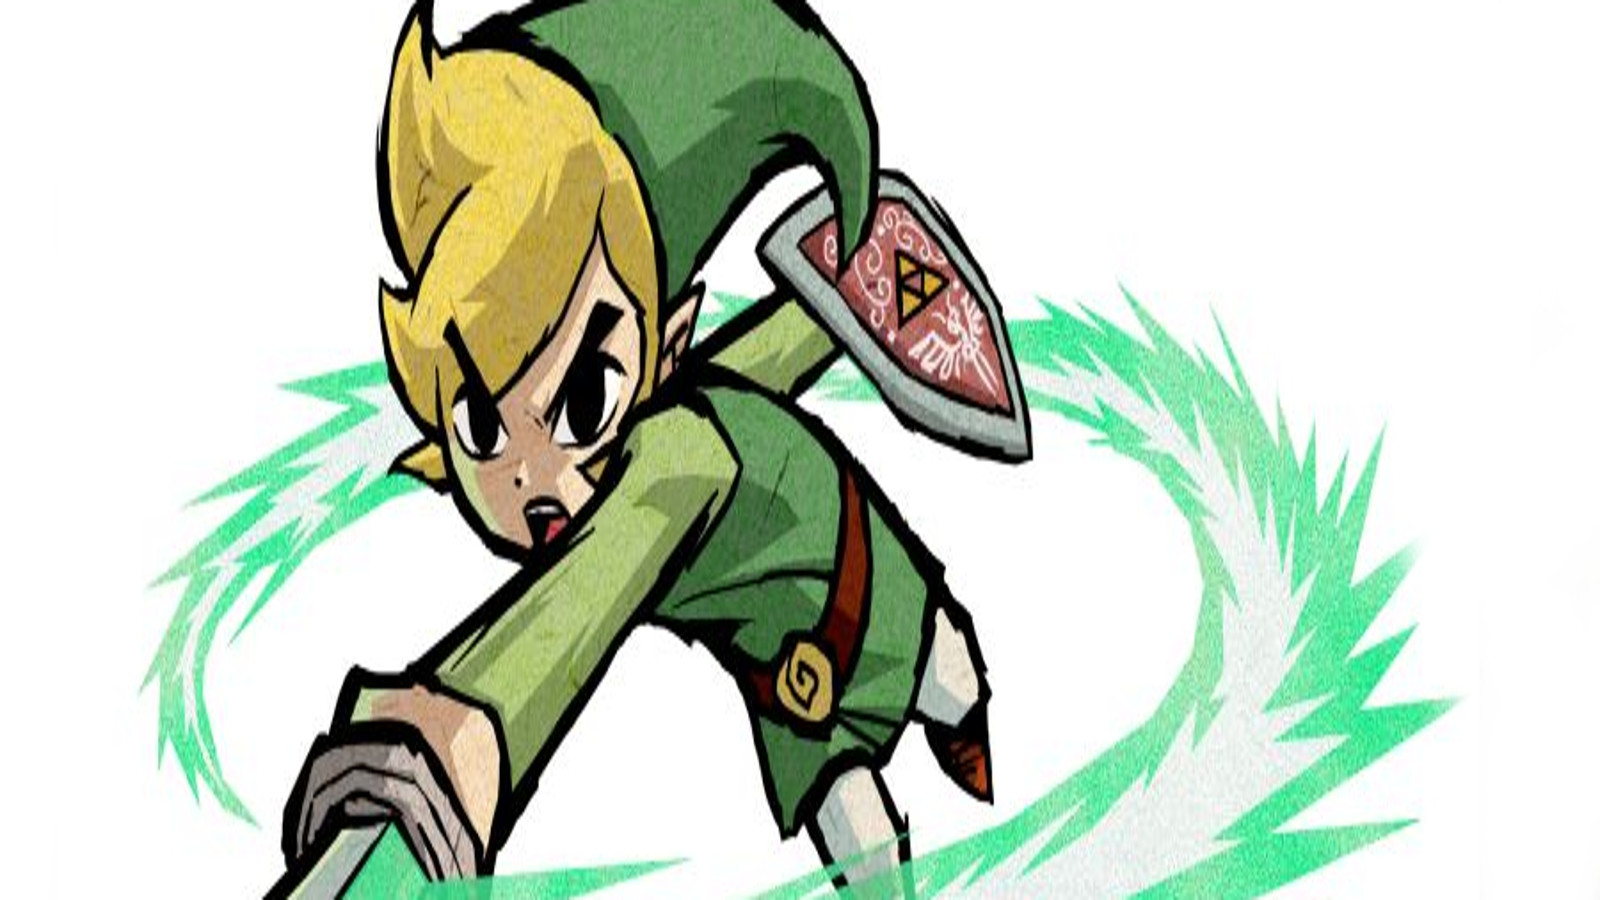 The Legend of Zelda: The Wind Waker HD Preview - The Legend Of Zelda: The Wind  Waker HD Trailer Sets Up The Story - Game Informer